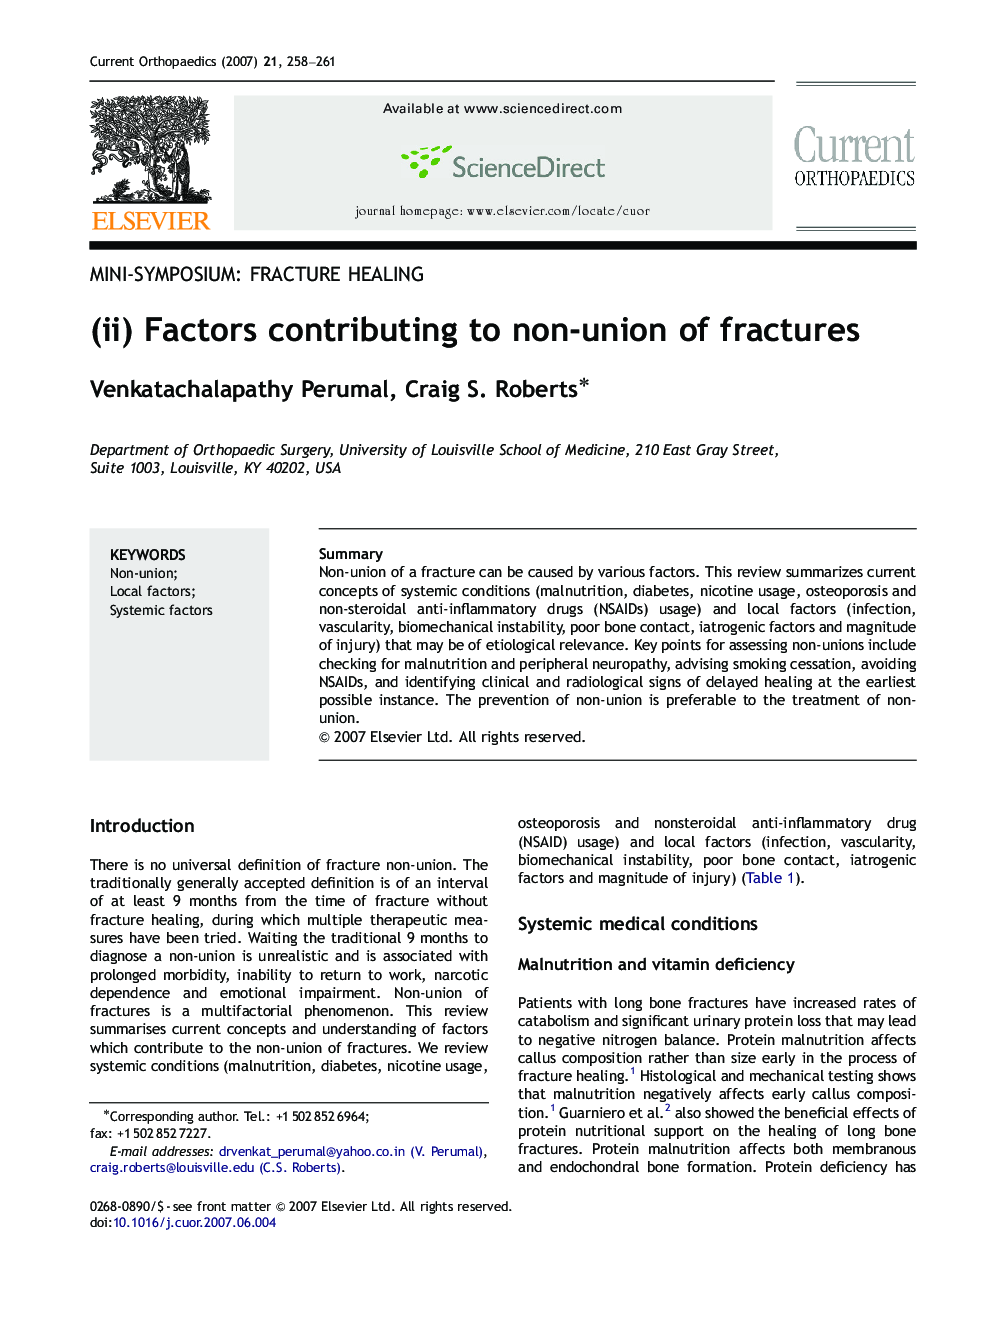 (ii) Factors contributing to non-union of fractures